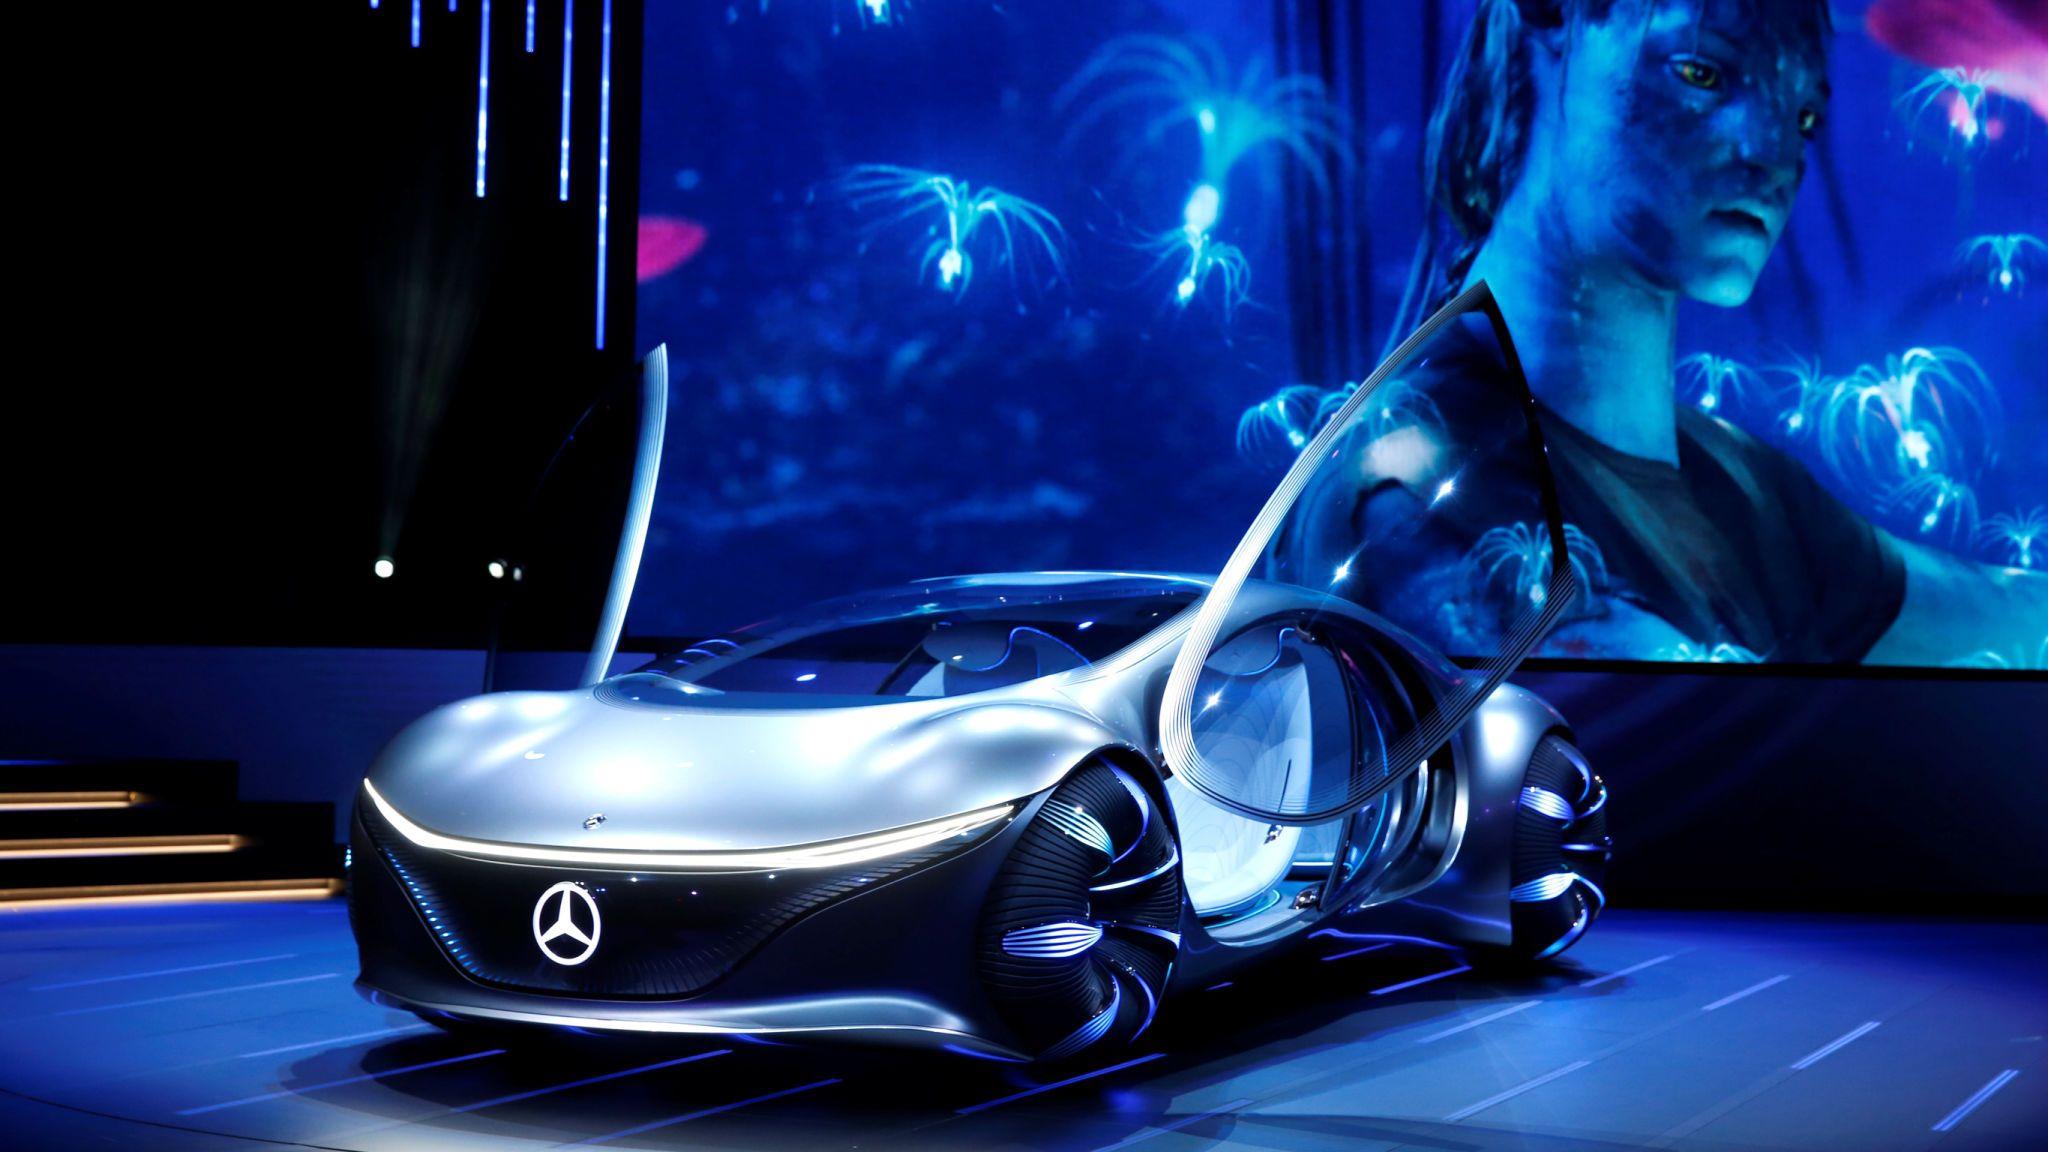 CES 2020: Mercedes Benz Unveils Concept Car Inspired By Film Avatar. Science & Tech News